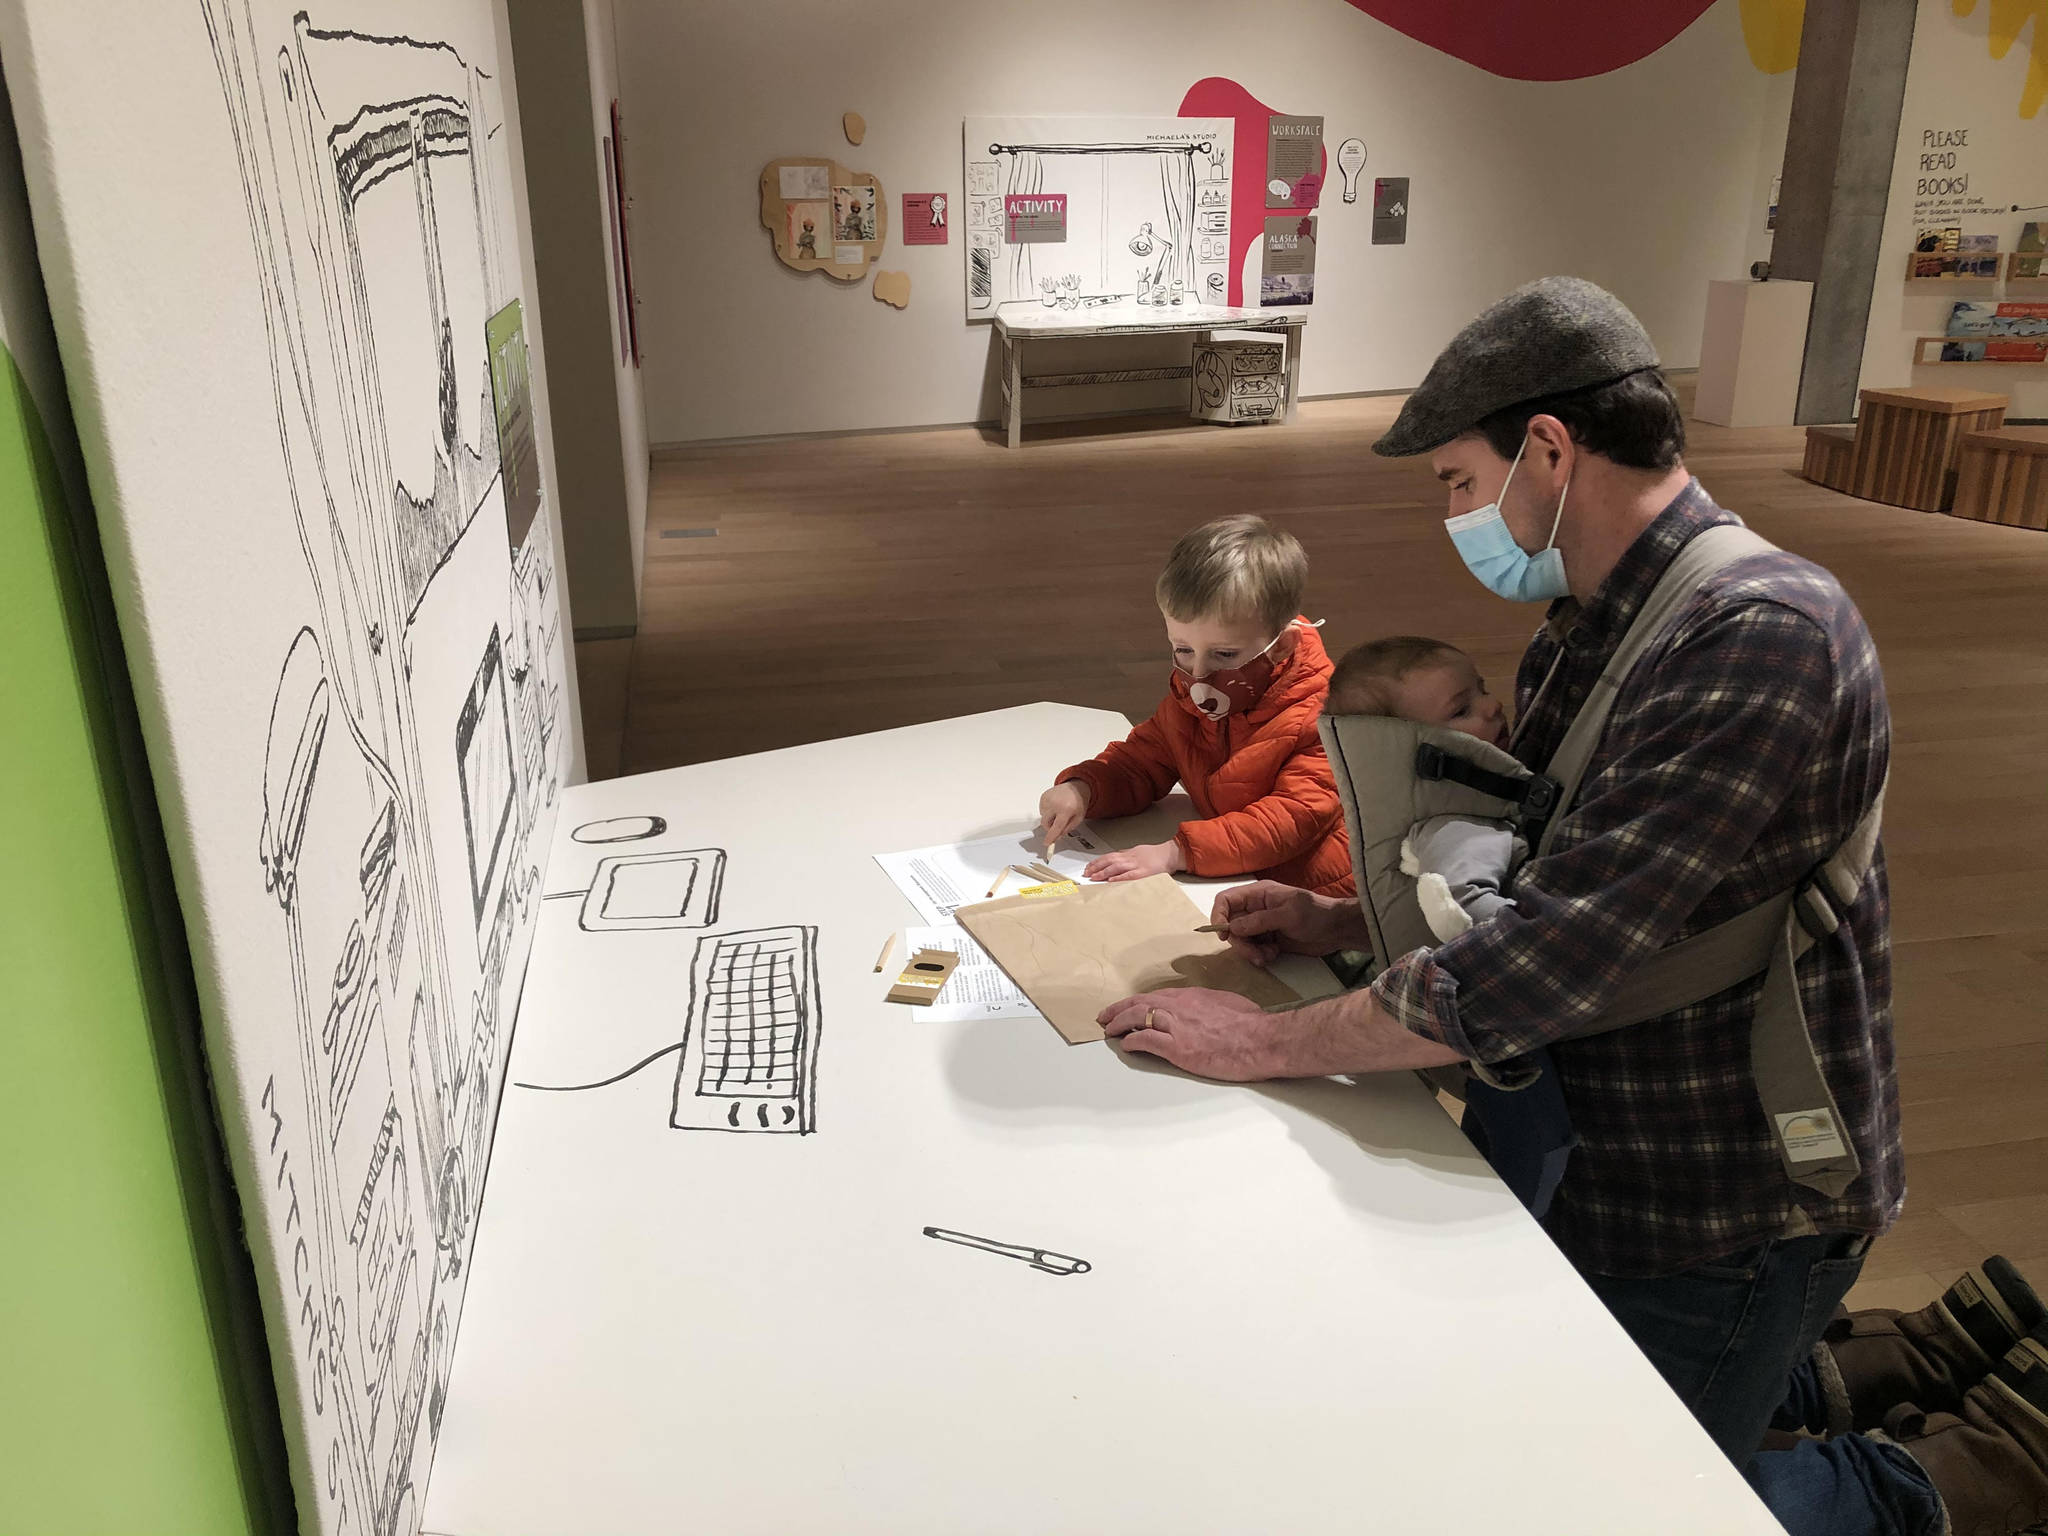 Sebastian Taylor-Manning pauses to sketch at a replica of an Alaskan illustrator’s desk. His brother McClain Taylor-Manning and his father, Chris Taylor, look on during a recent visit to the State Museum to see the new exhibit, "Illustrating Alaska: Artists Making Children’s Books", on display through April 3. (Courtesy Photo/Jackie Manning)